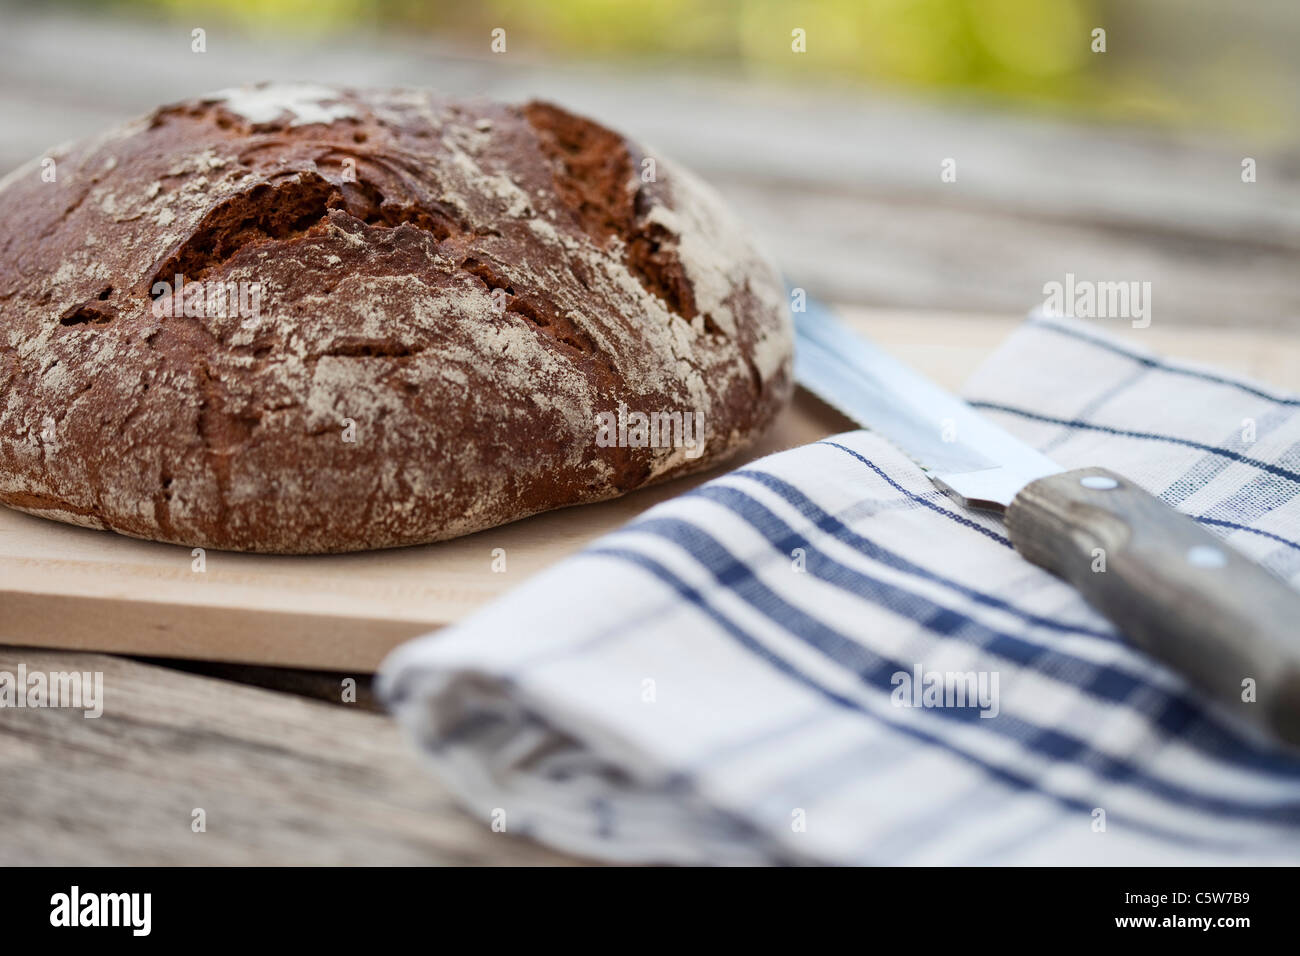 Loaf of farmhouse bread on wooden table Stock Photo